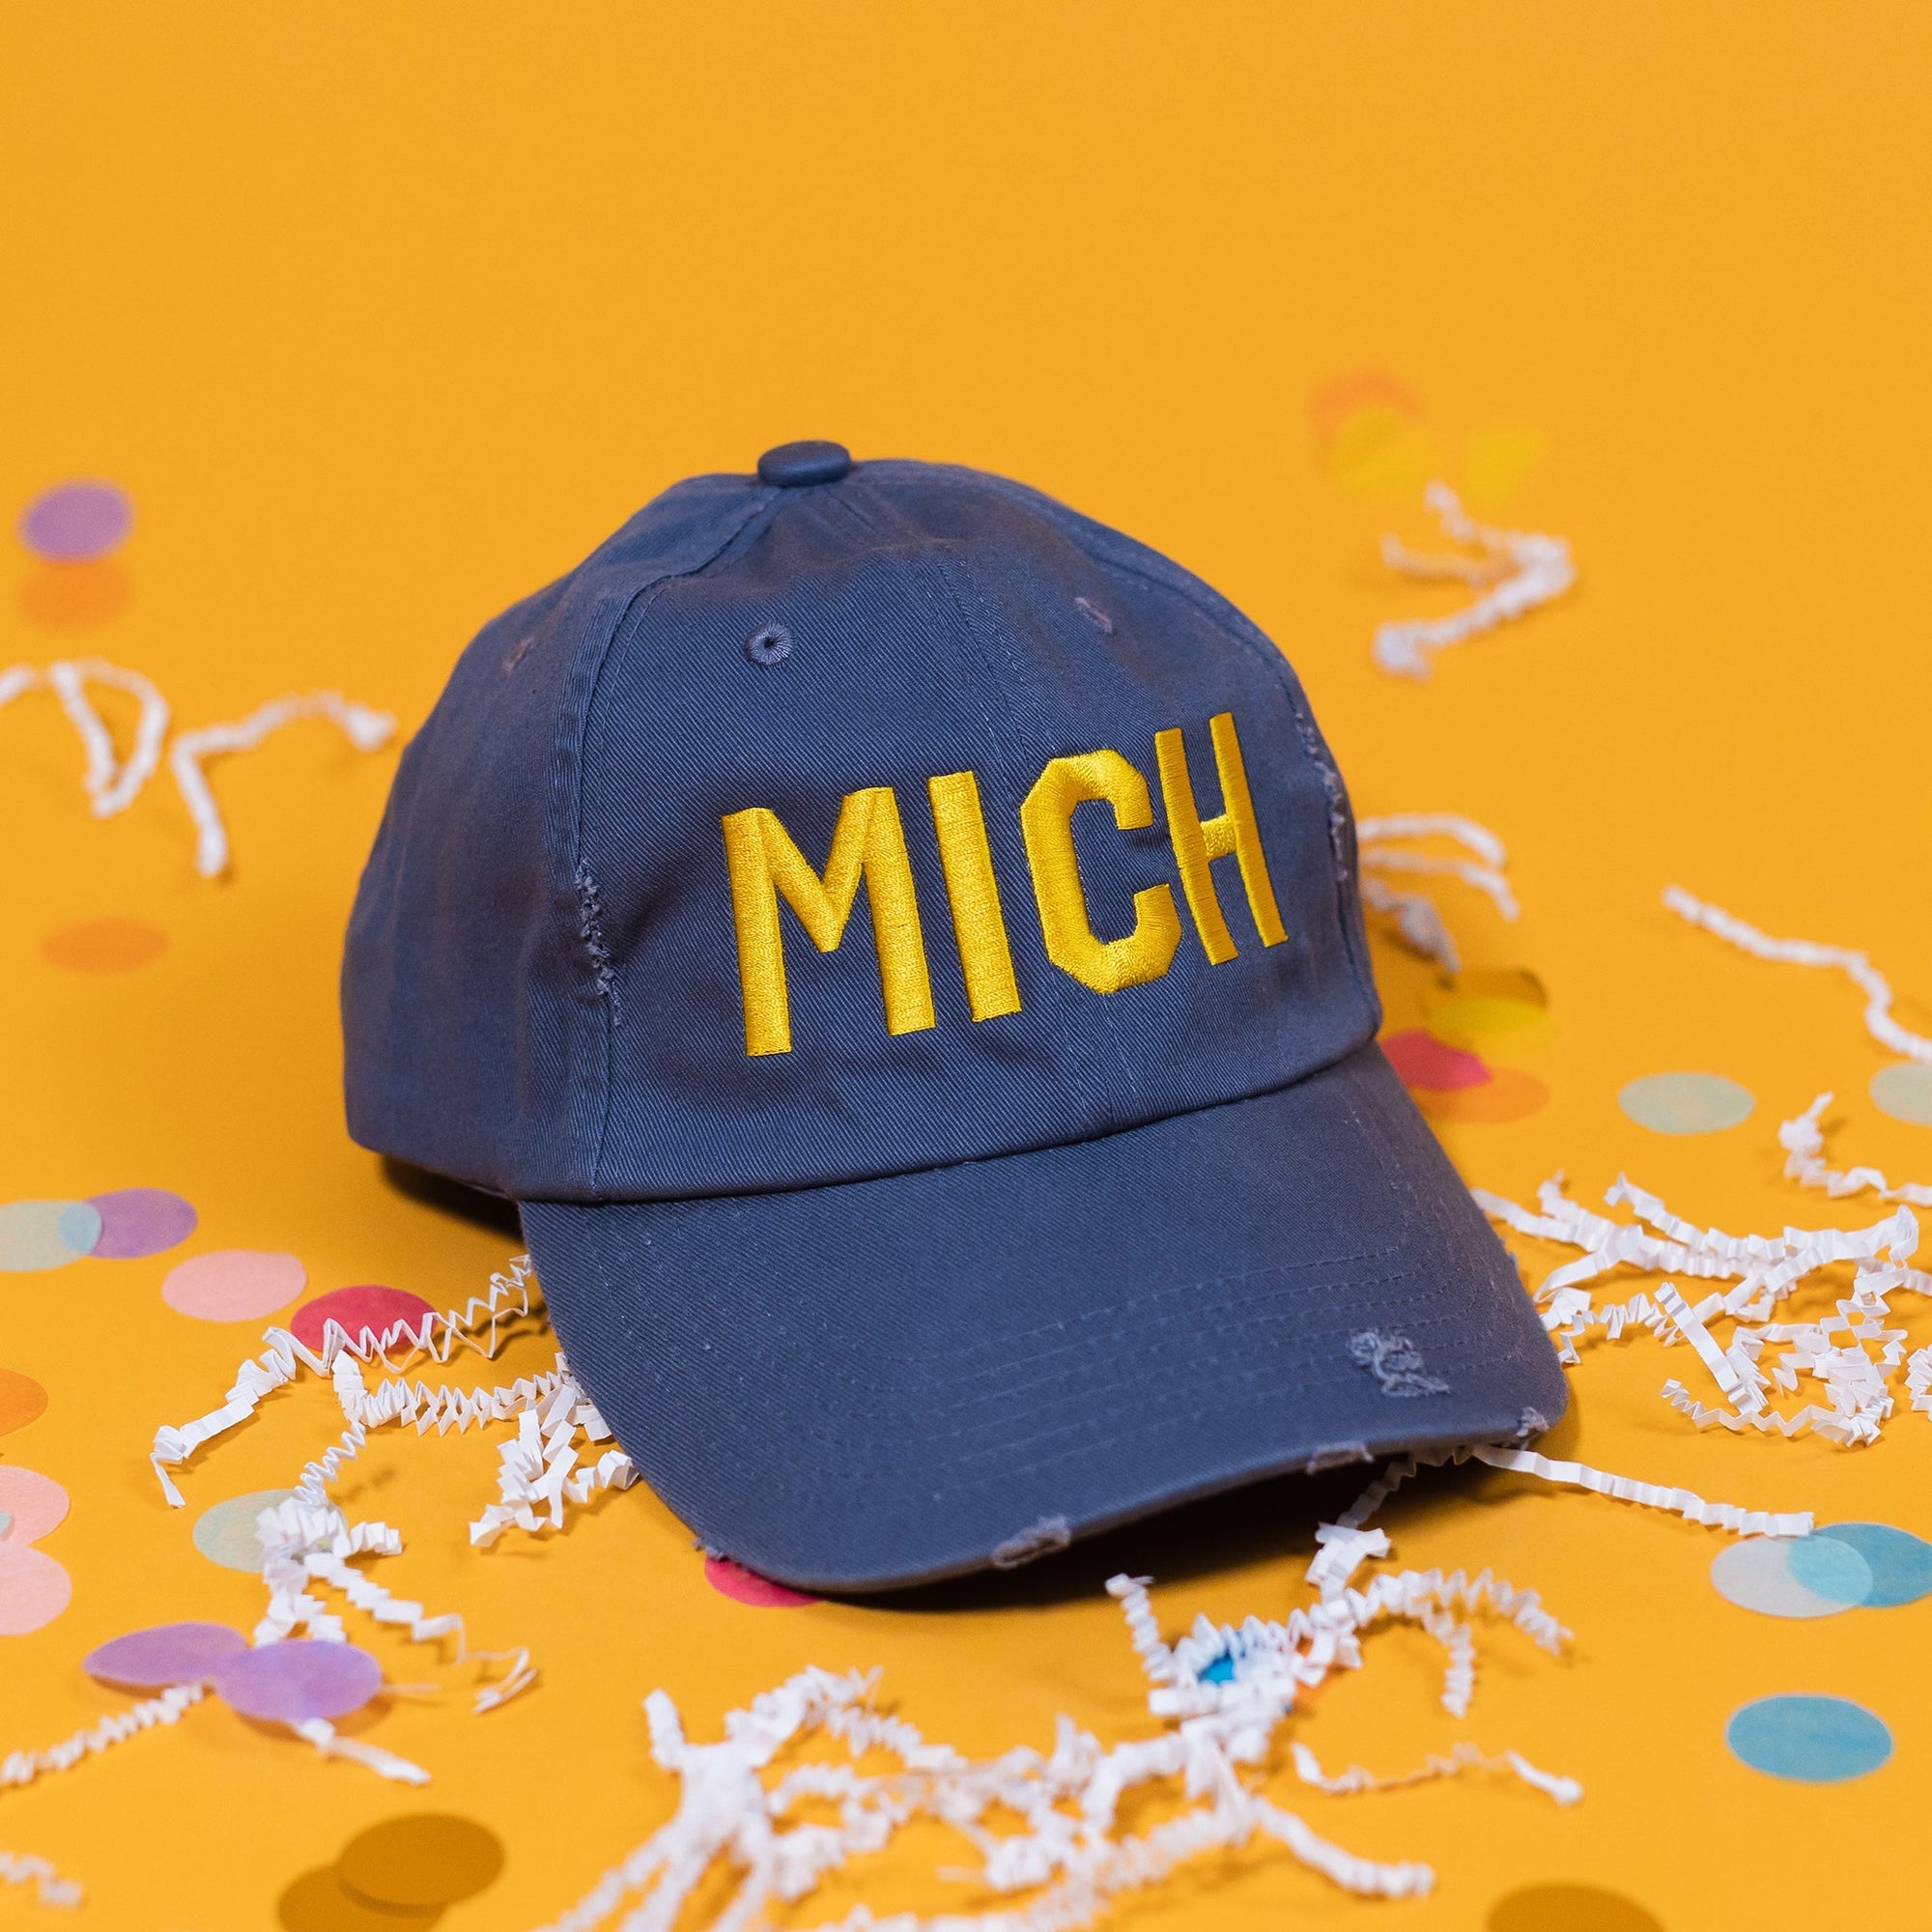 On a sunny mustard background sits a navy hat with white crinkle and big, colorful confetti scattered around. The hat is distressed with bold, yellow embroidered lettering that says "MICH."